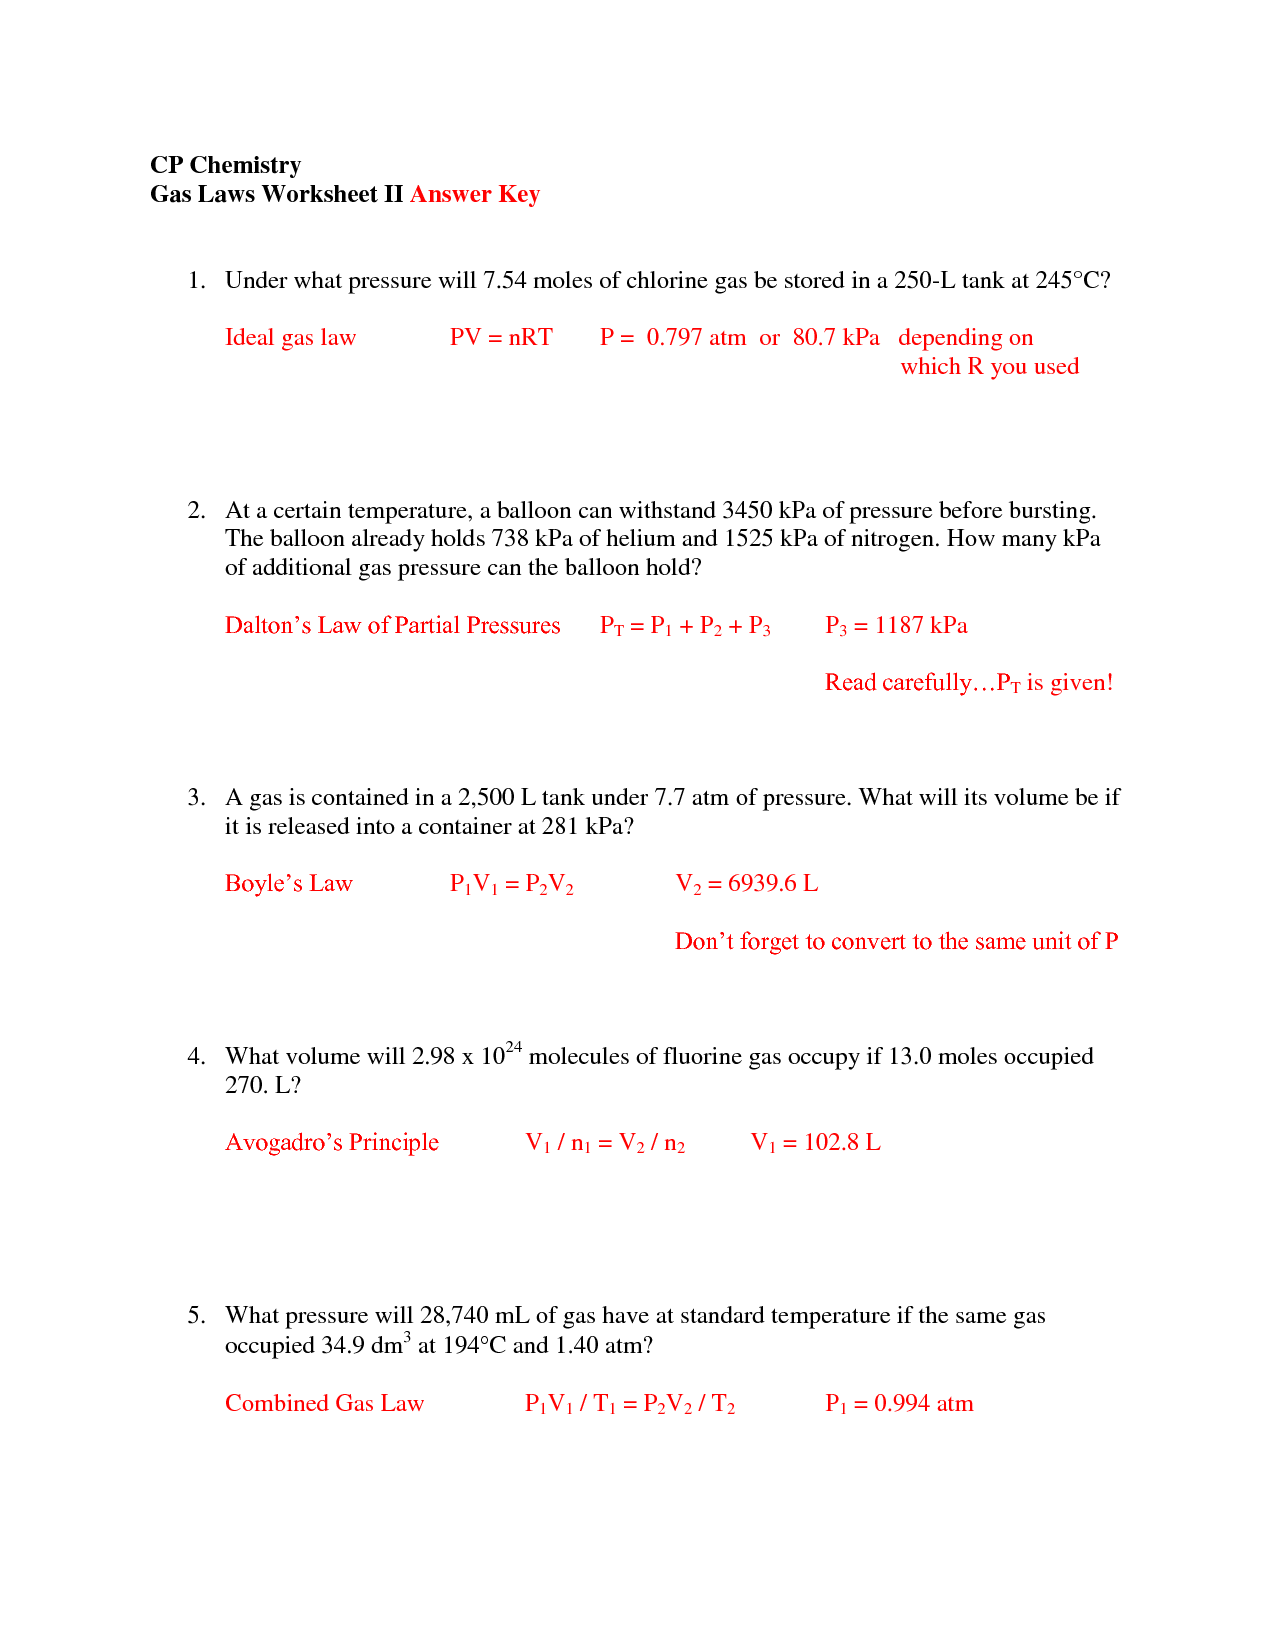 16 Best Images of Mixed Gas Laws Worksheet Answers - Mixed Gas Laws